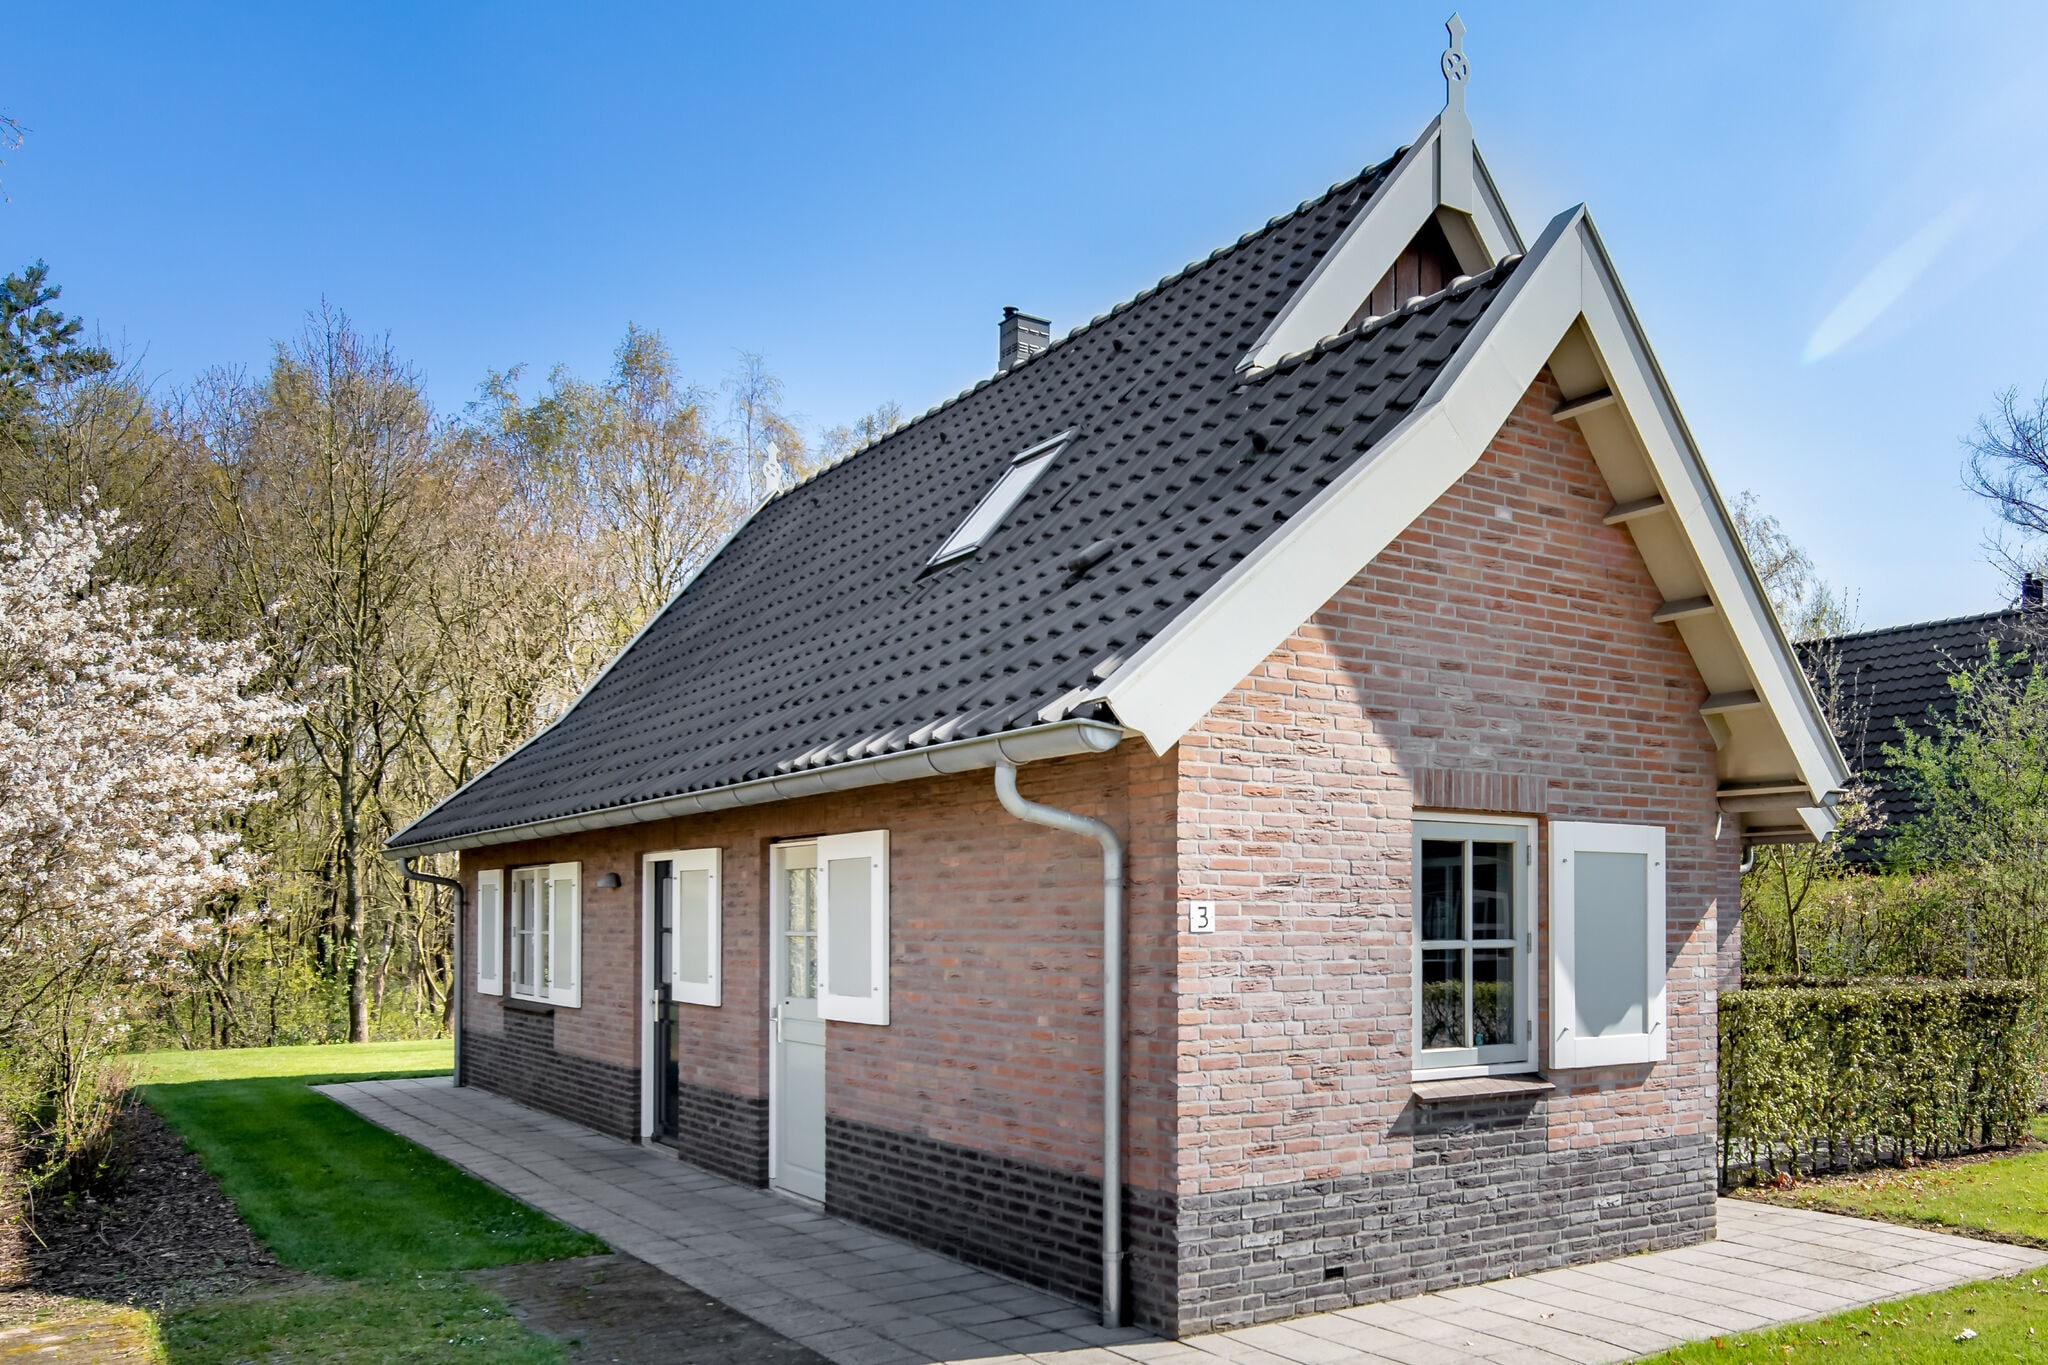 Beautiful holiday home with 2 bathrooms, 2 km from Appelscha